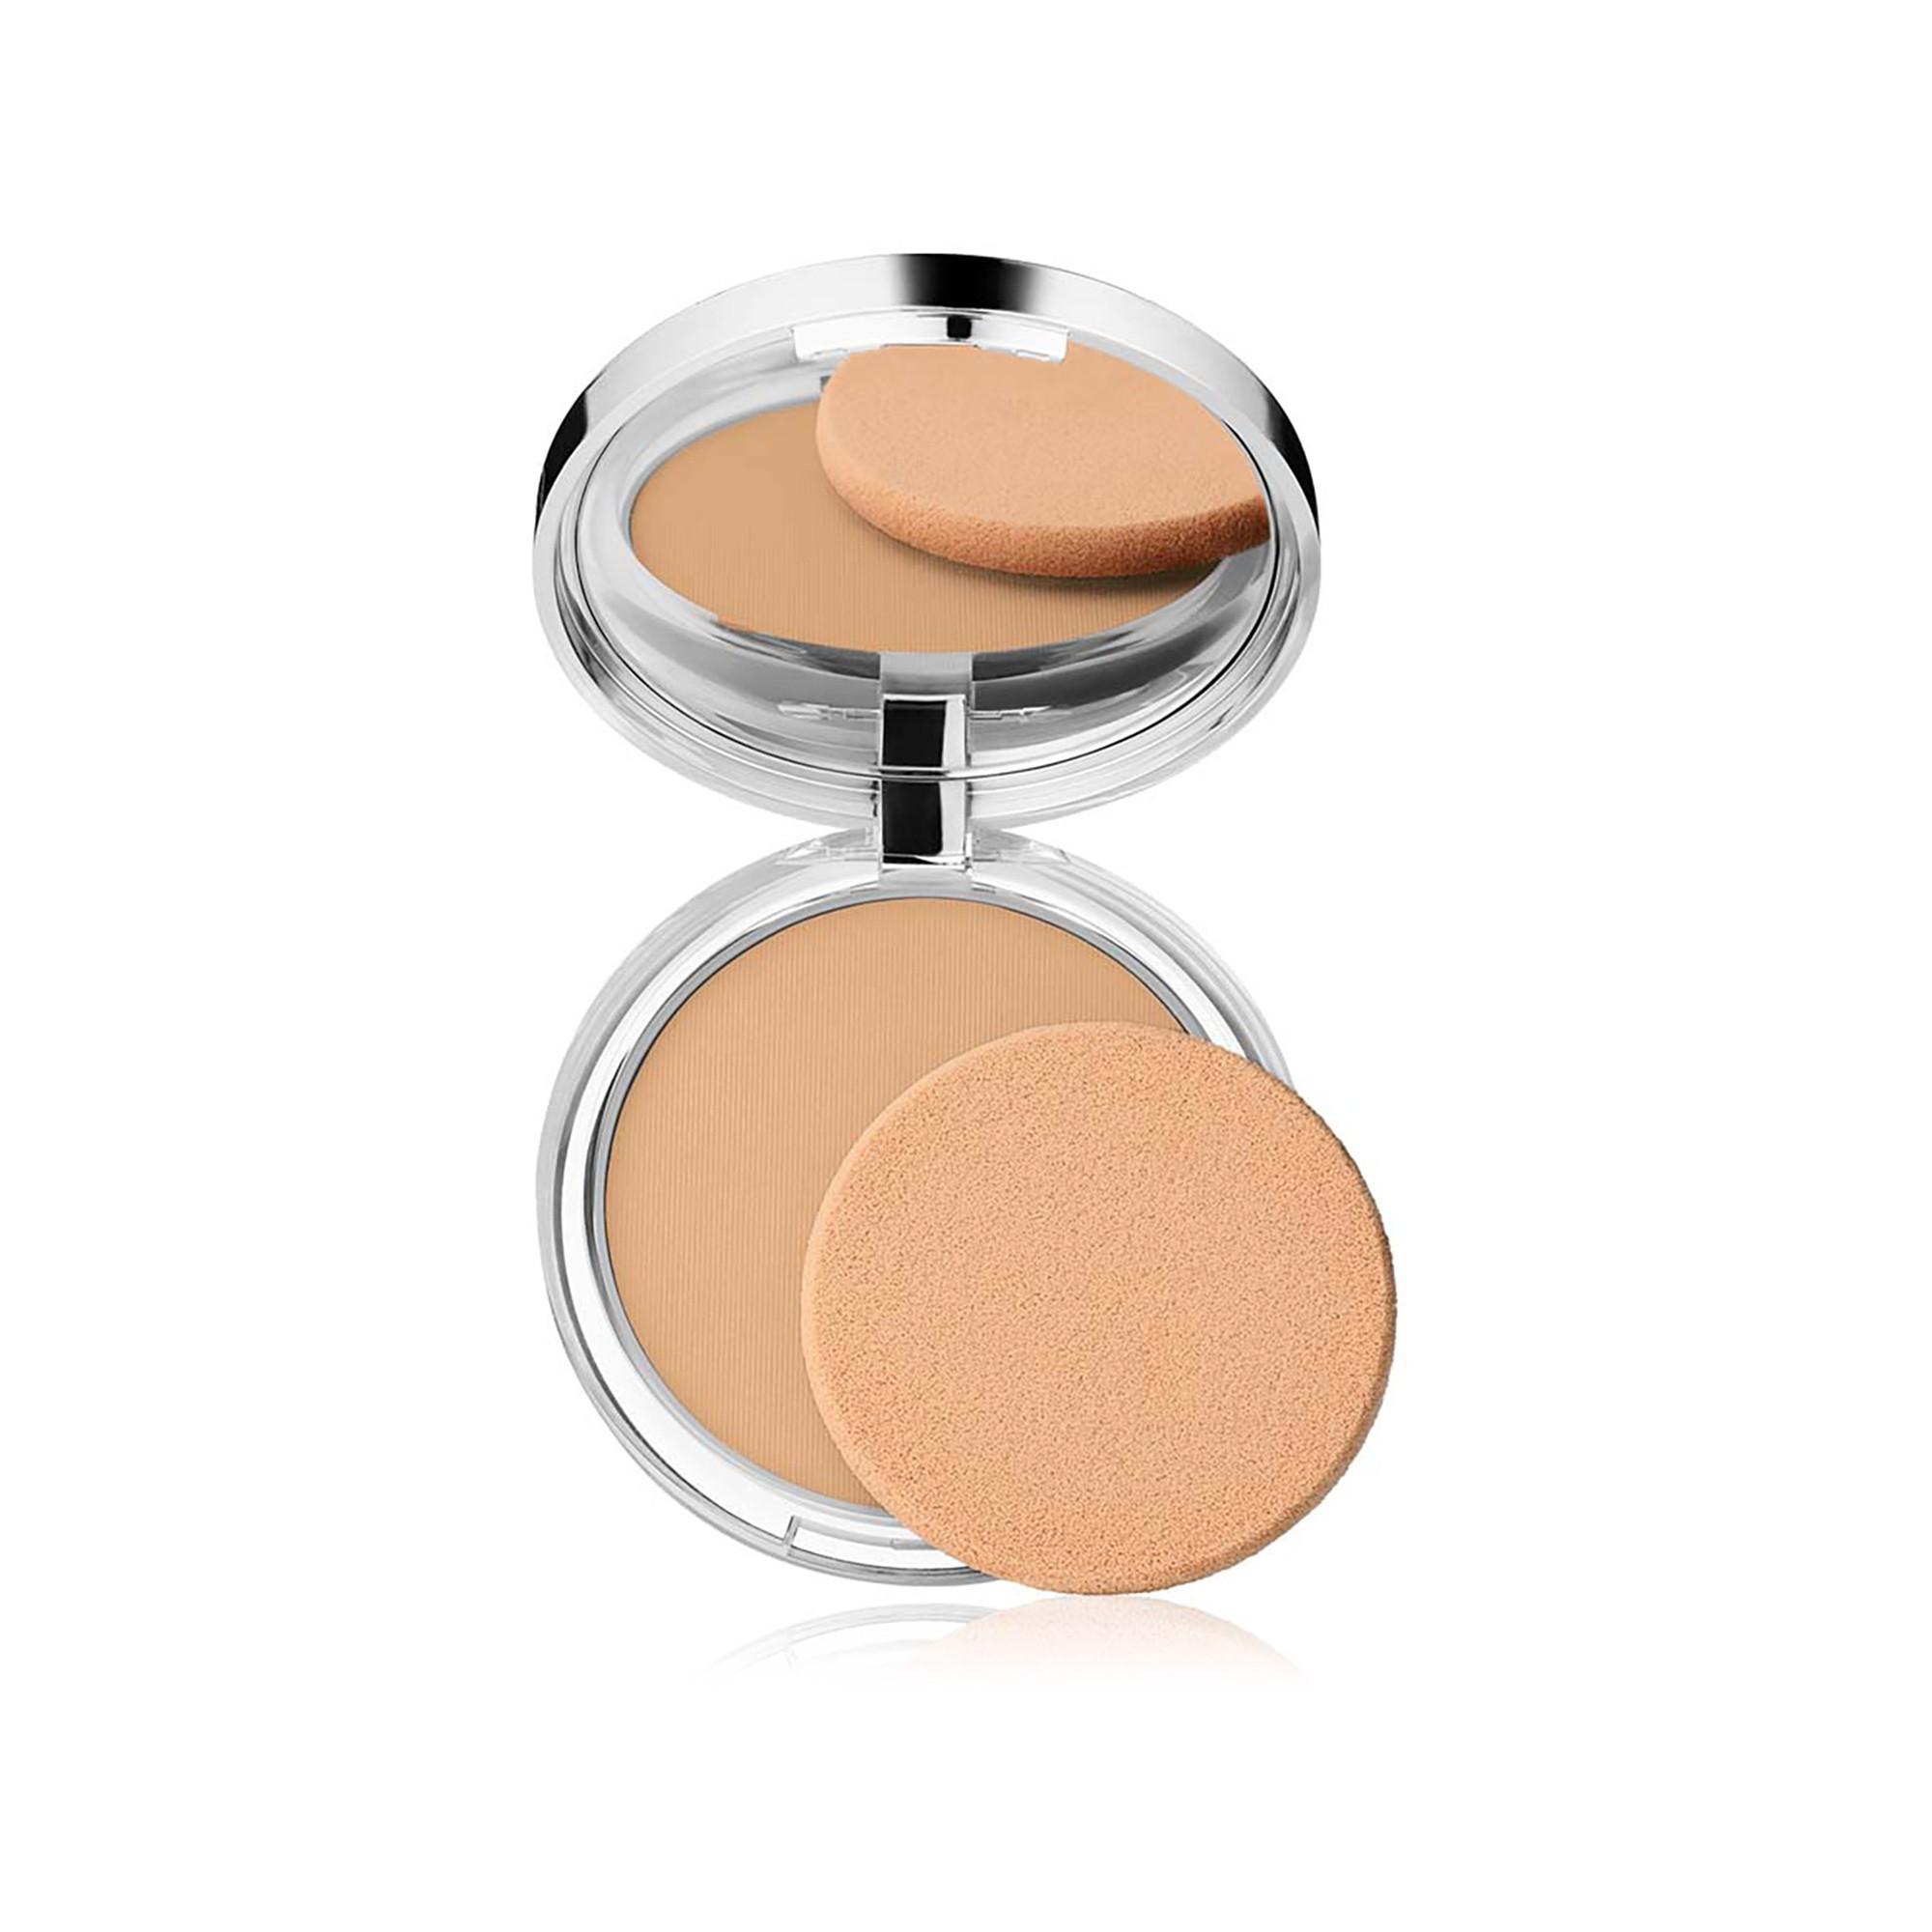 Clinique - Stay-Matte Sheer Pressed Powder - 04 Stay Honey